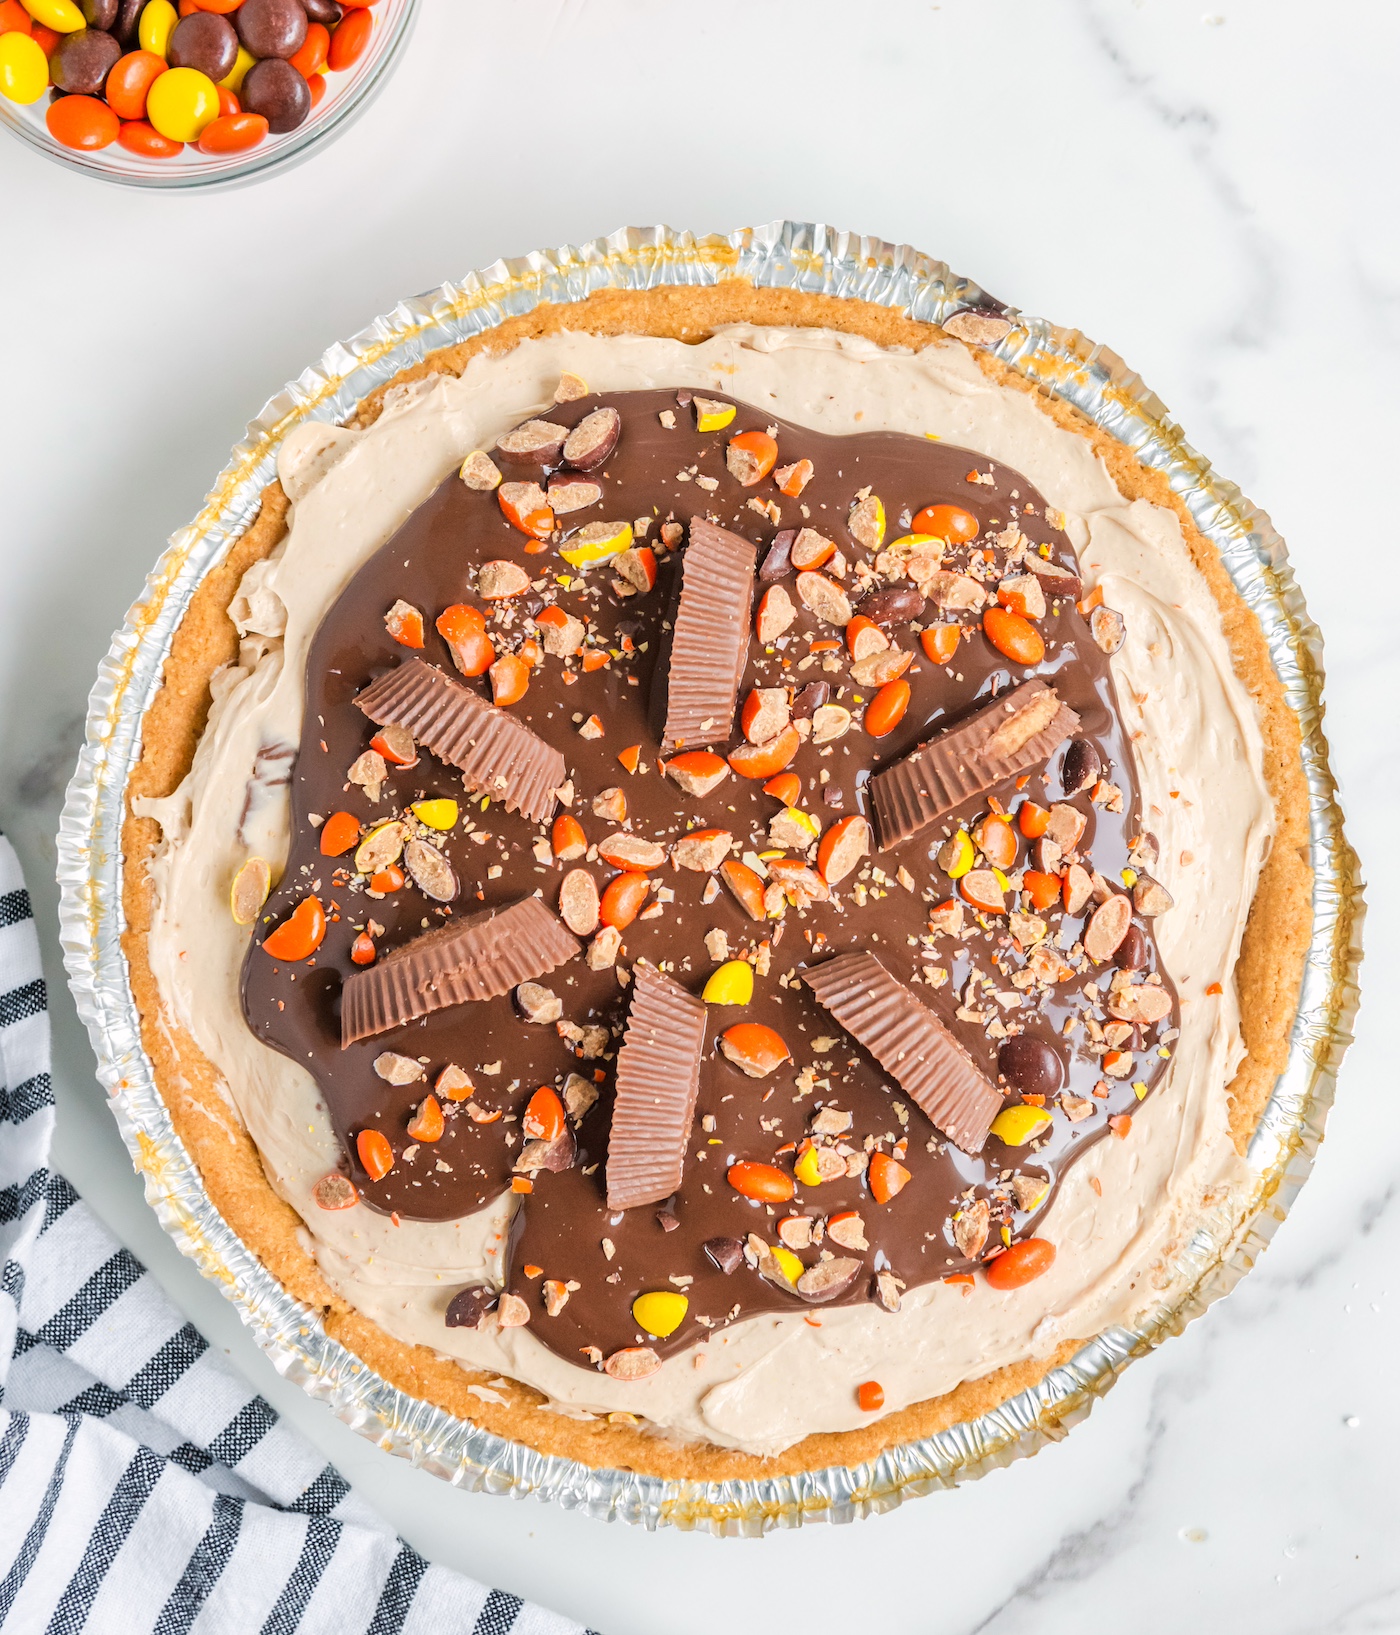 Mini reese's pieces sprinkled onto the top of the pie